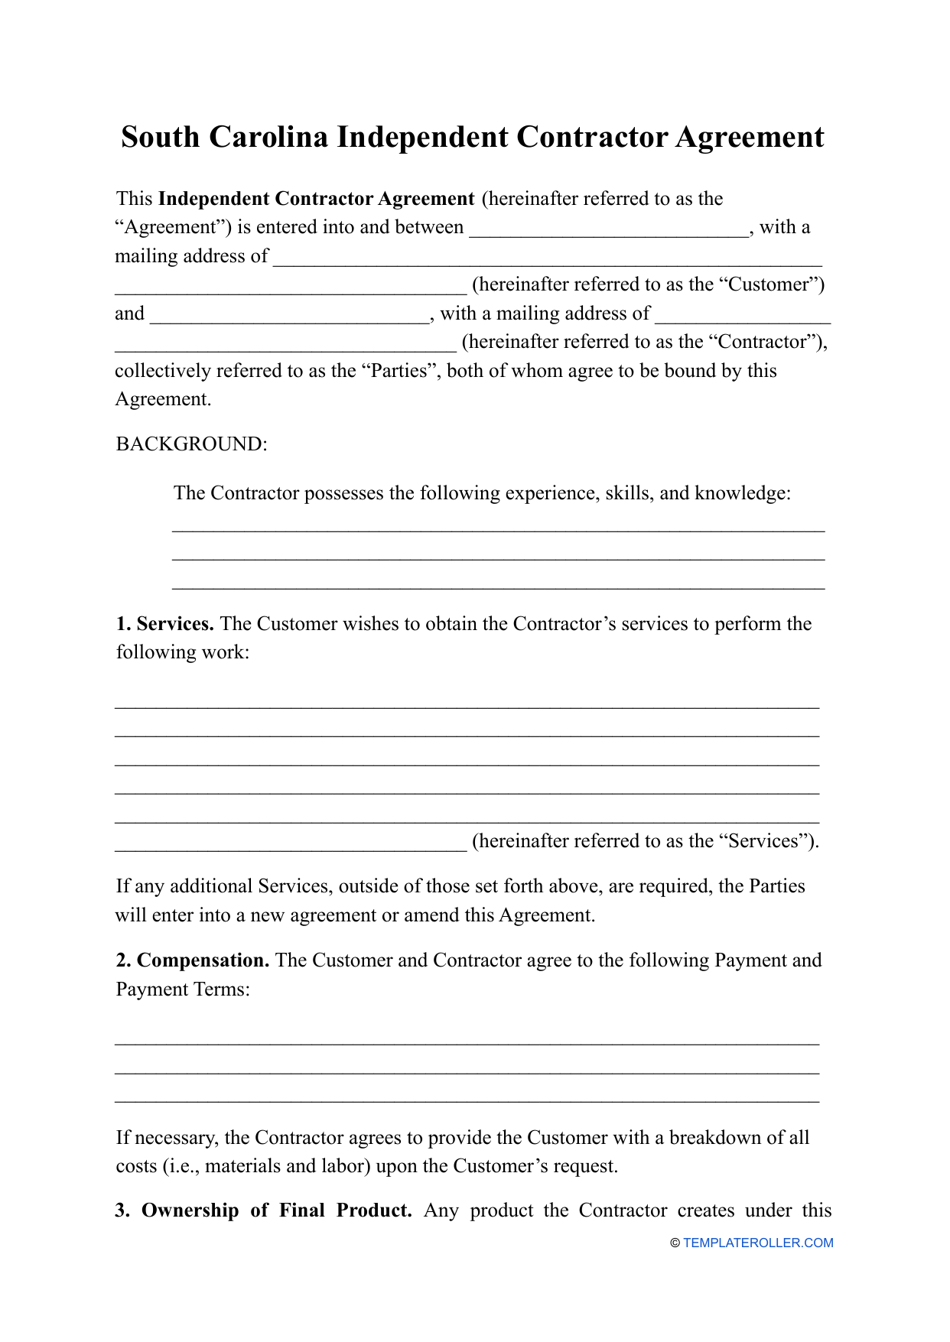 Independent Contractor Agreement Template - South Carolina, Page 1